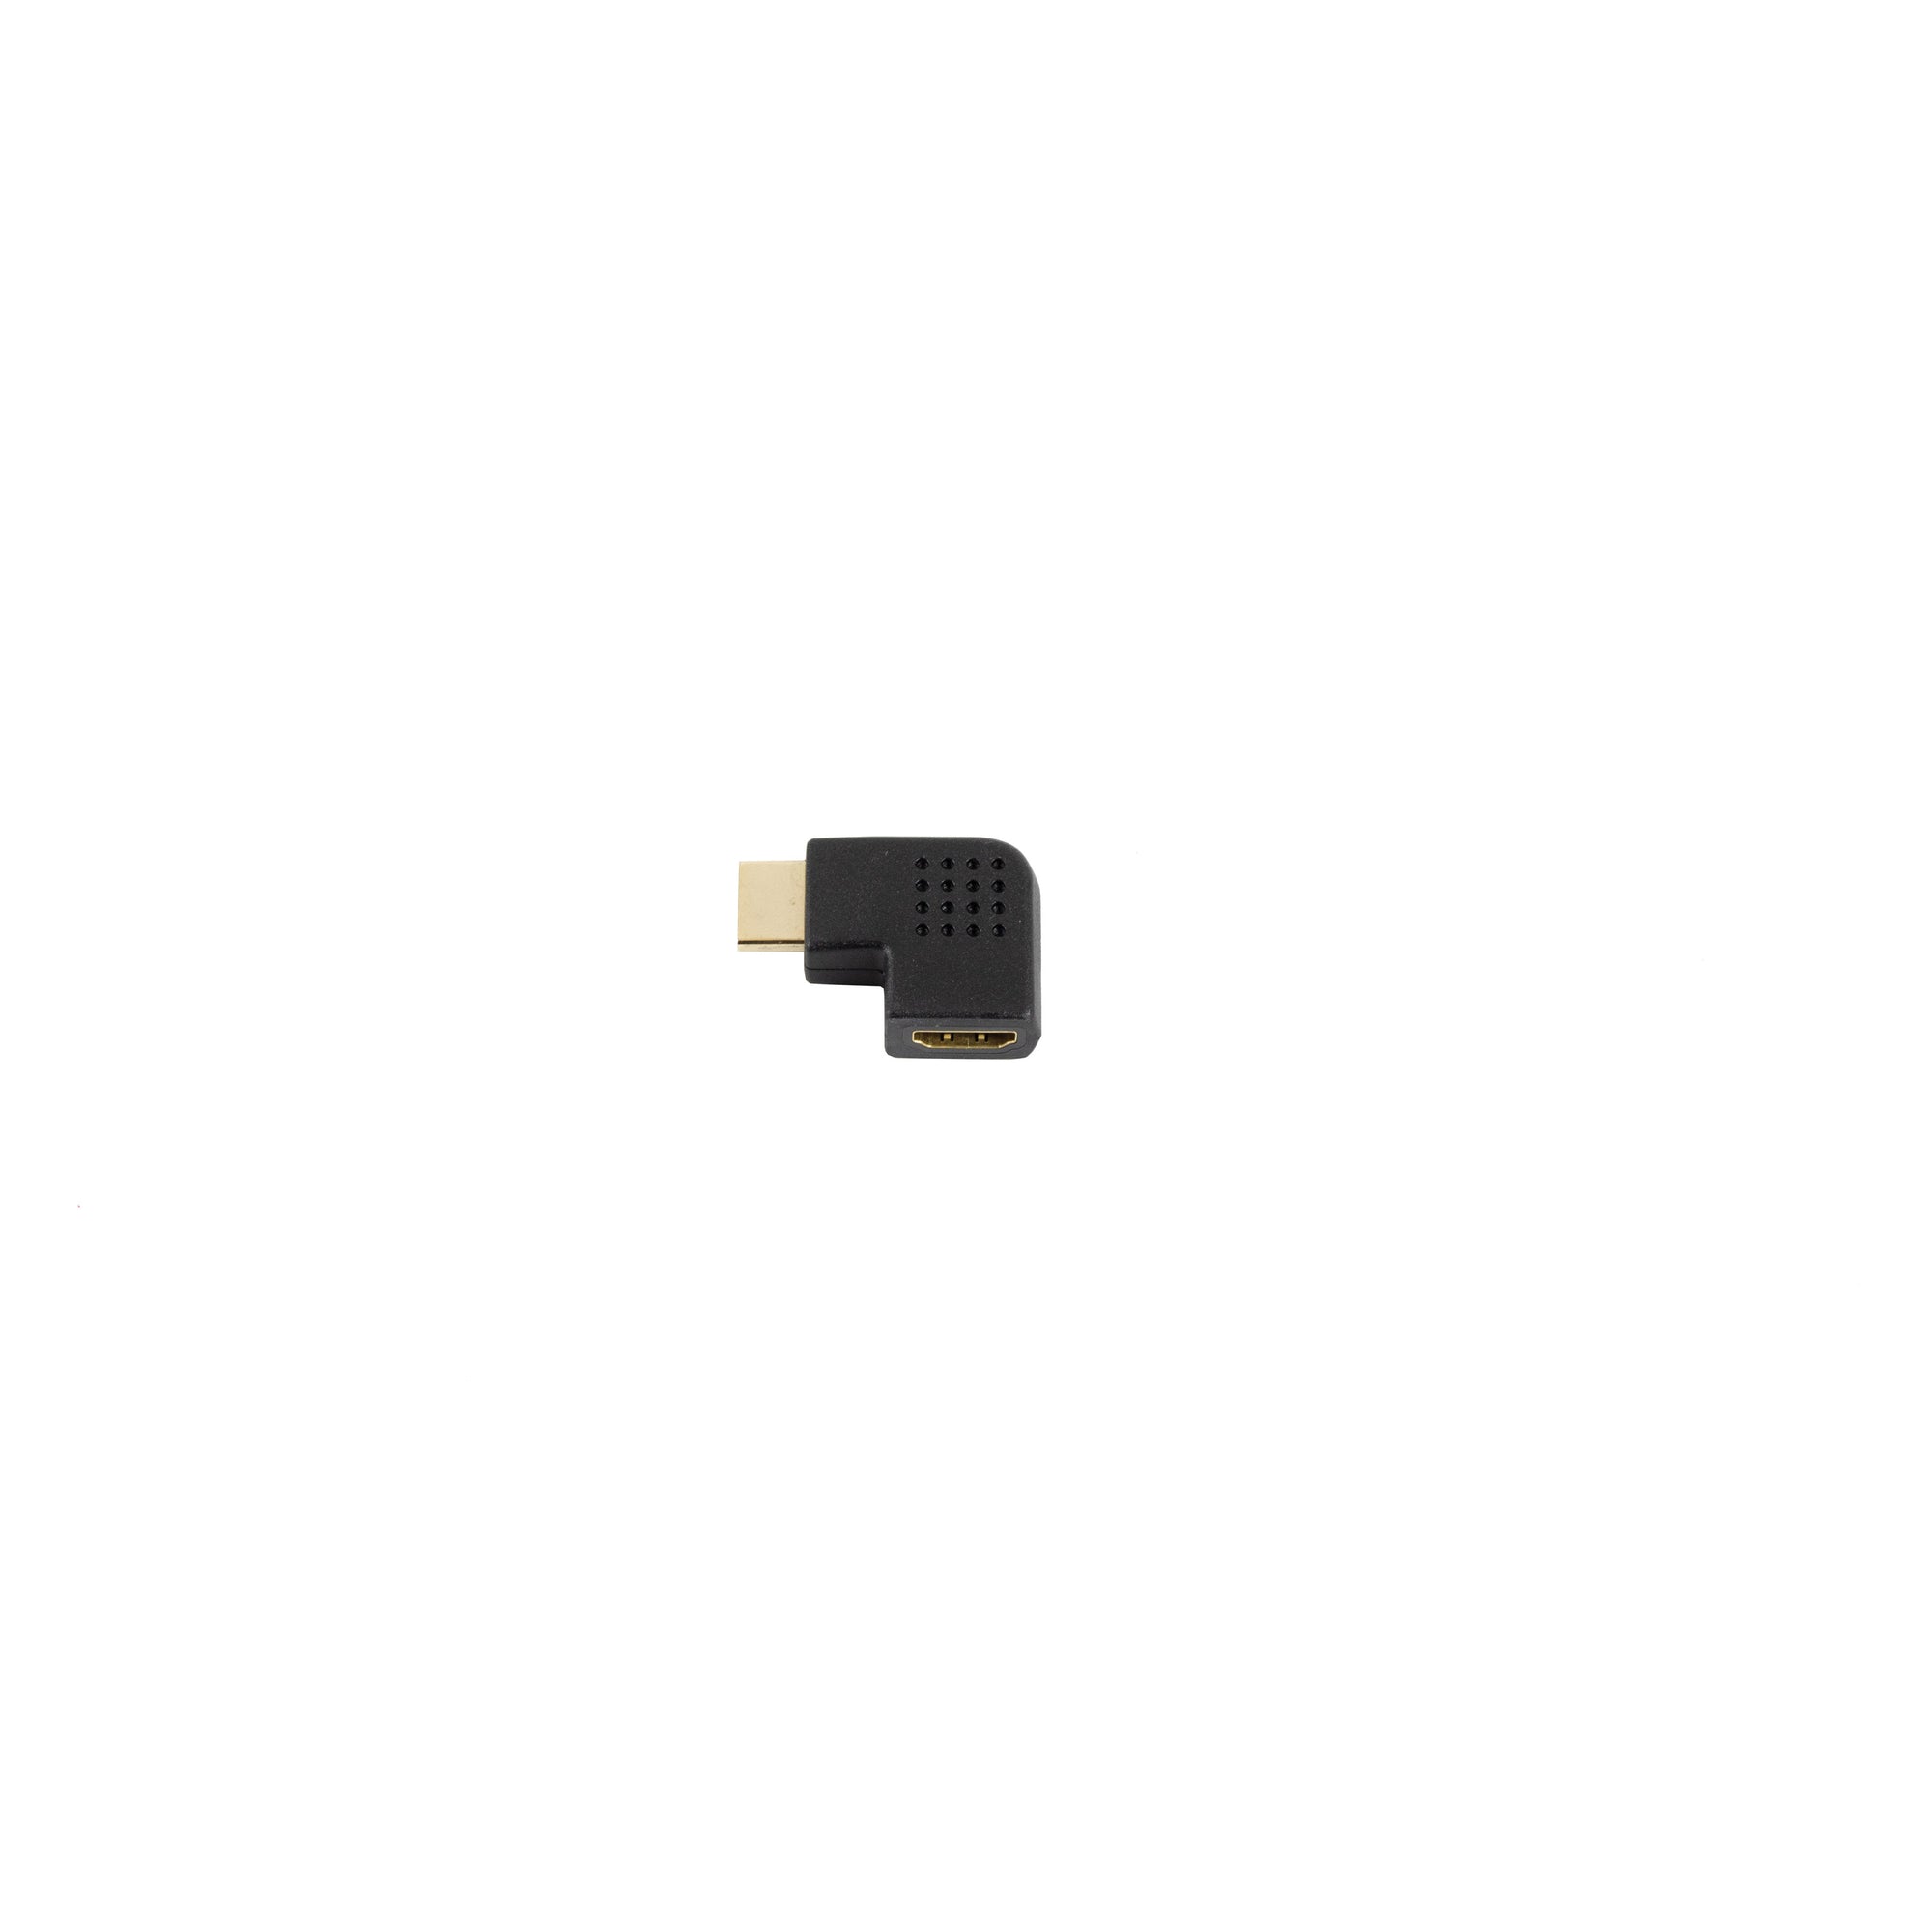 Pace International PTK-150 Left HDMI Adapter (2 Pack)